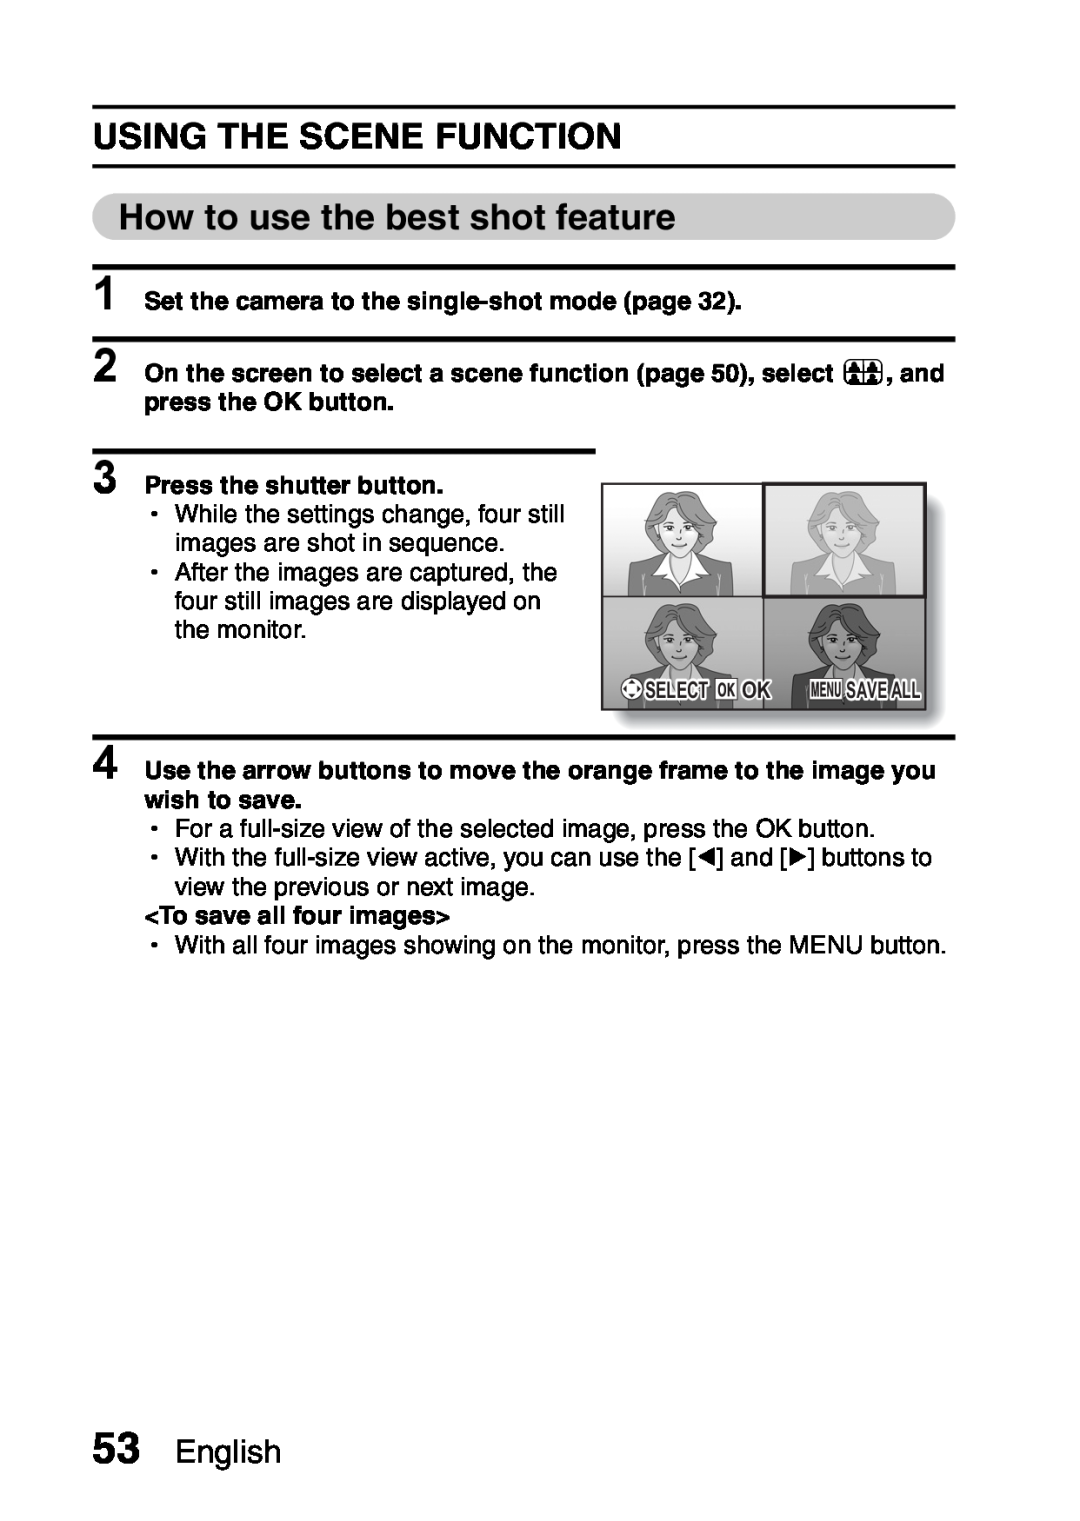 Samsung R50 instruction manual USING THE SCENE FUNCTION How to use the best shot feature, English, Press the shutter button 